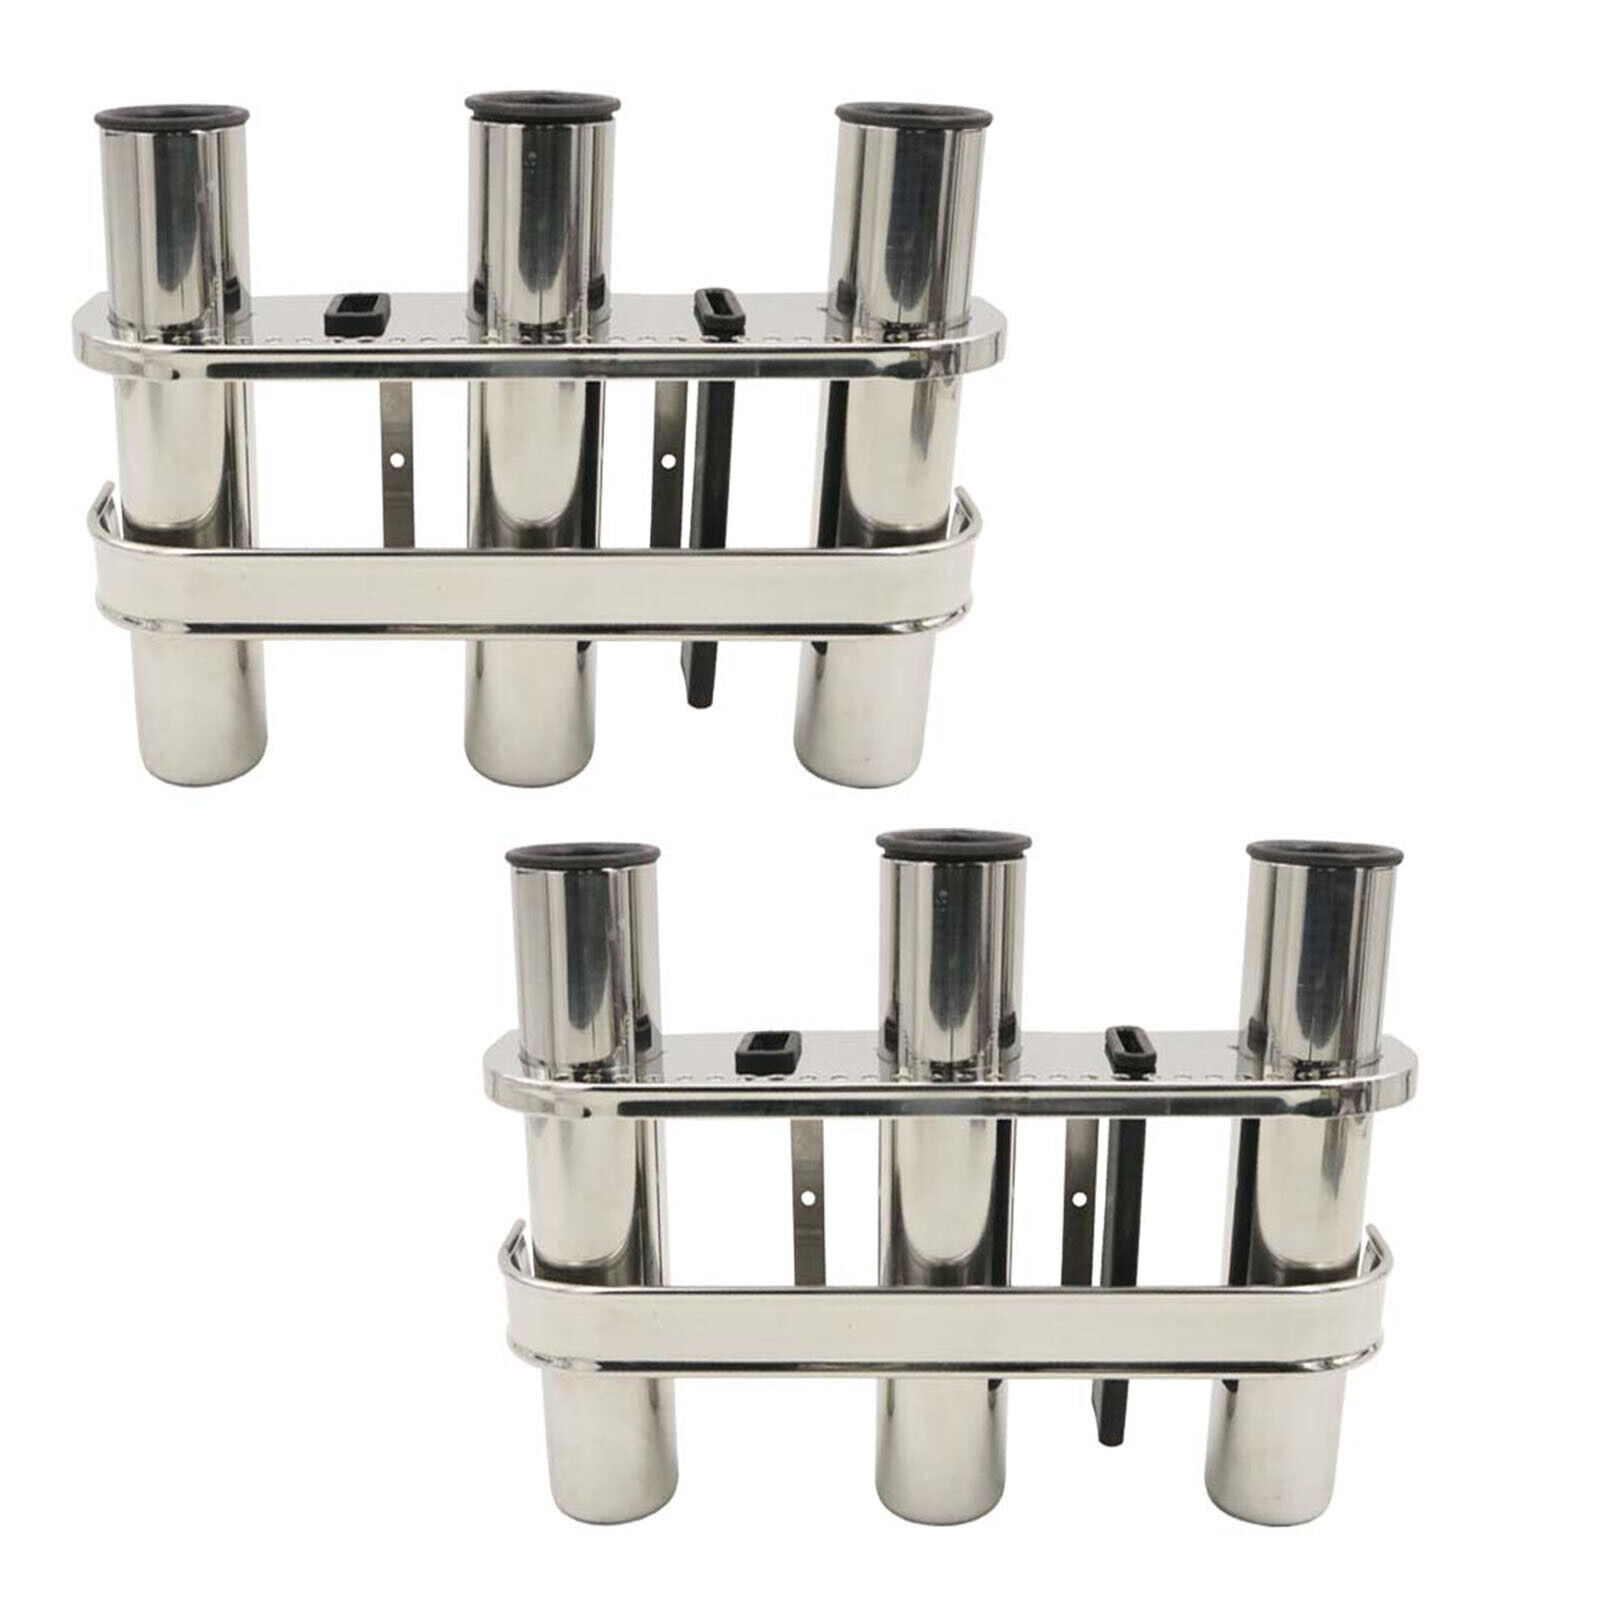 2Pieces Stainless Steel 3 Tube Outrigger Rod Holder Tackle Rack Holder Solid